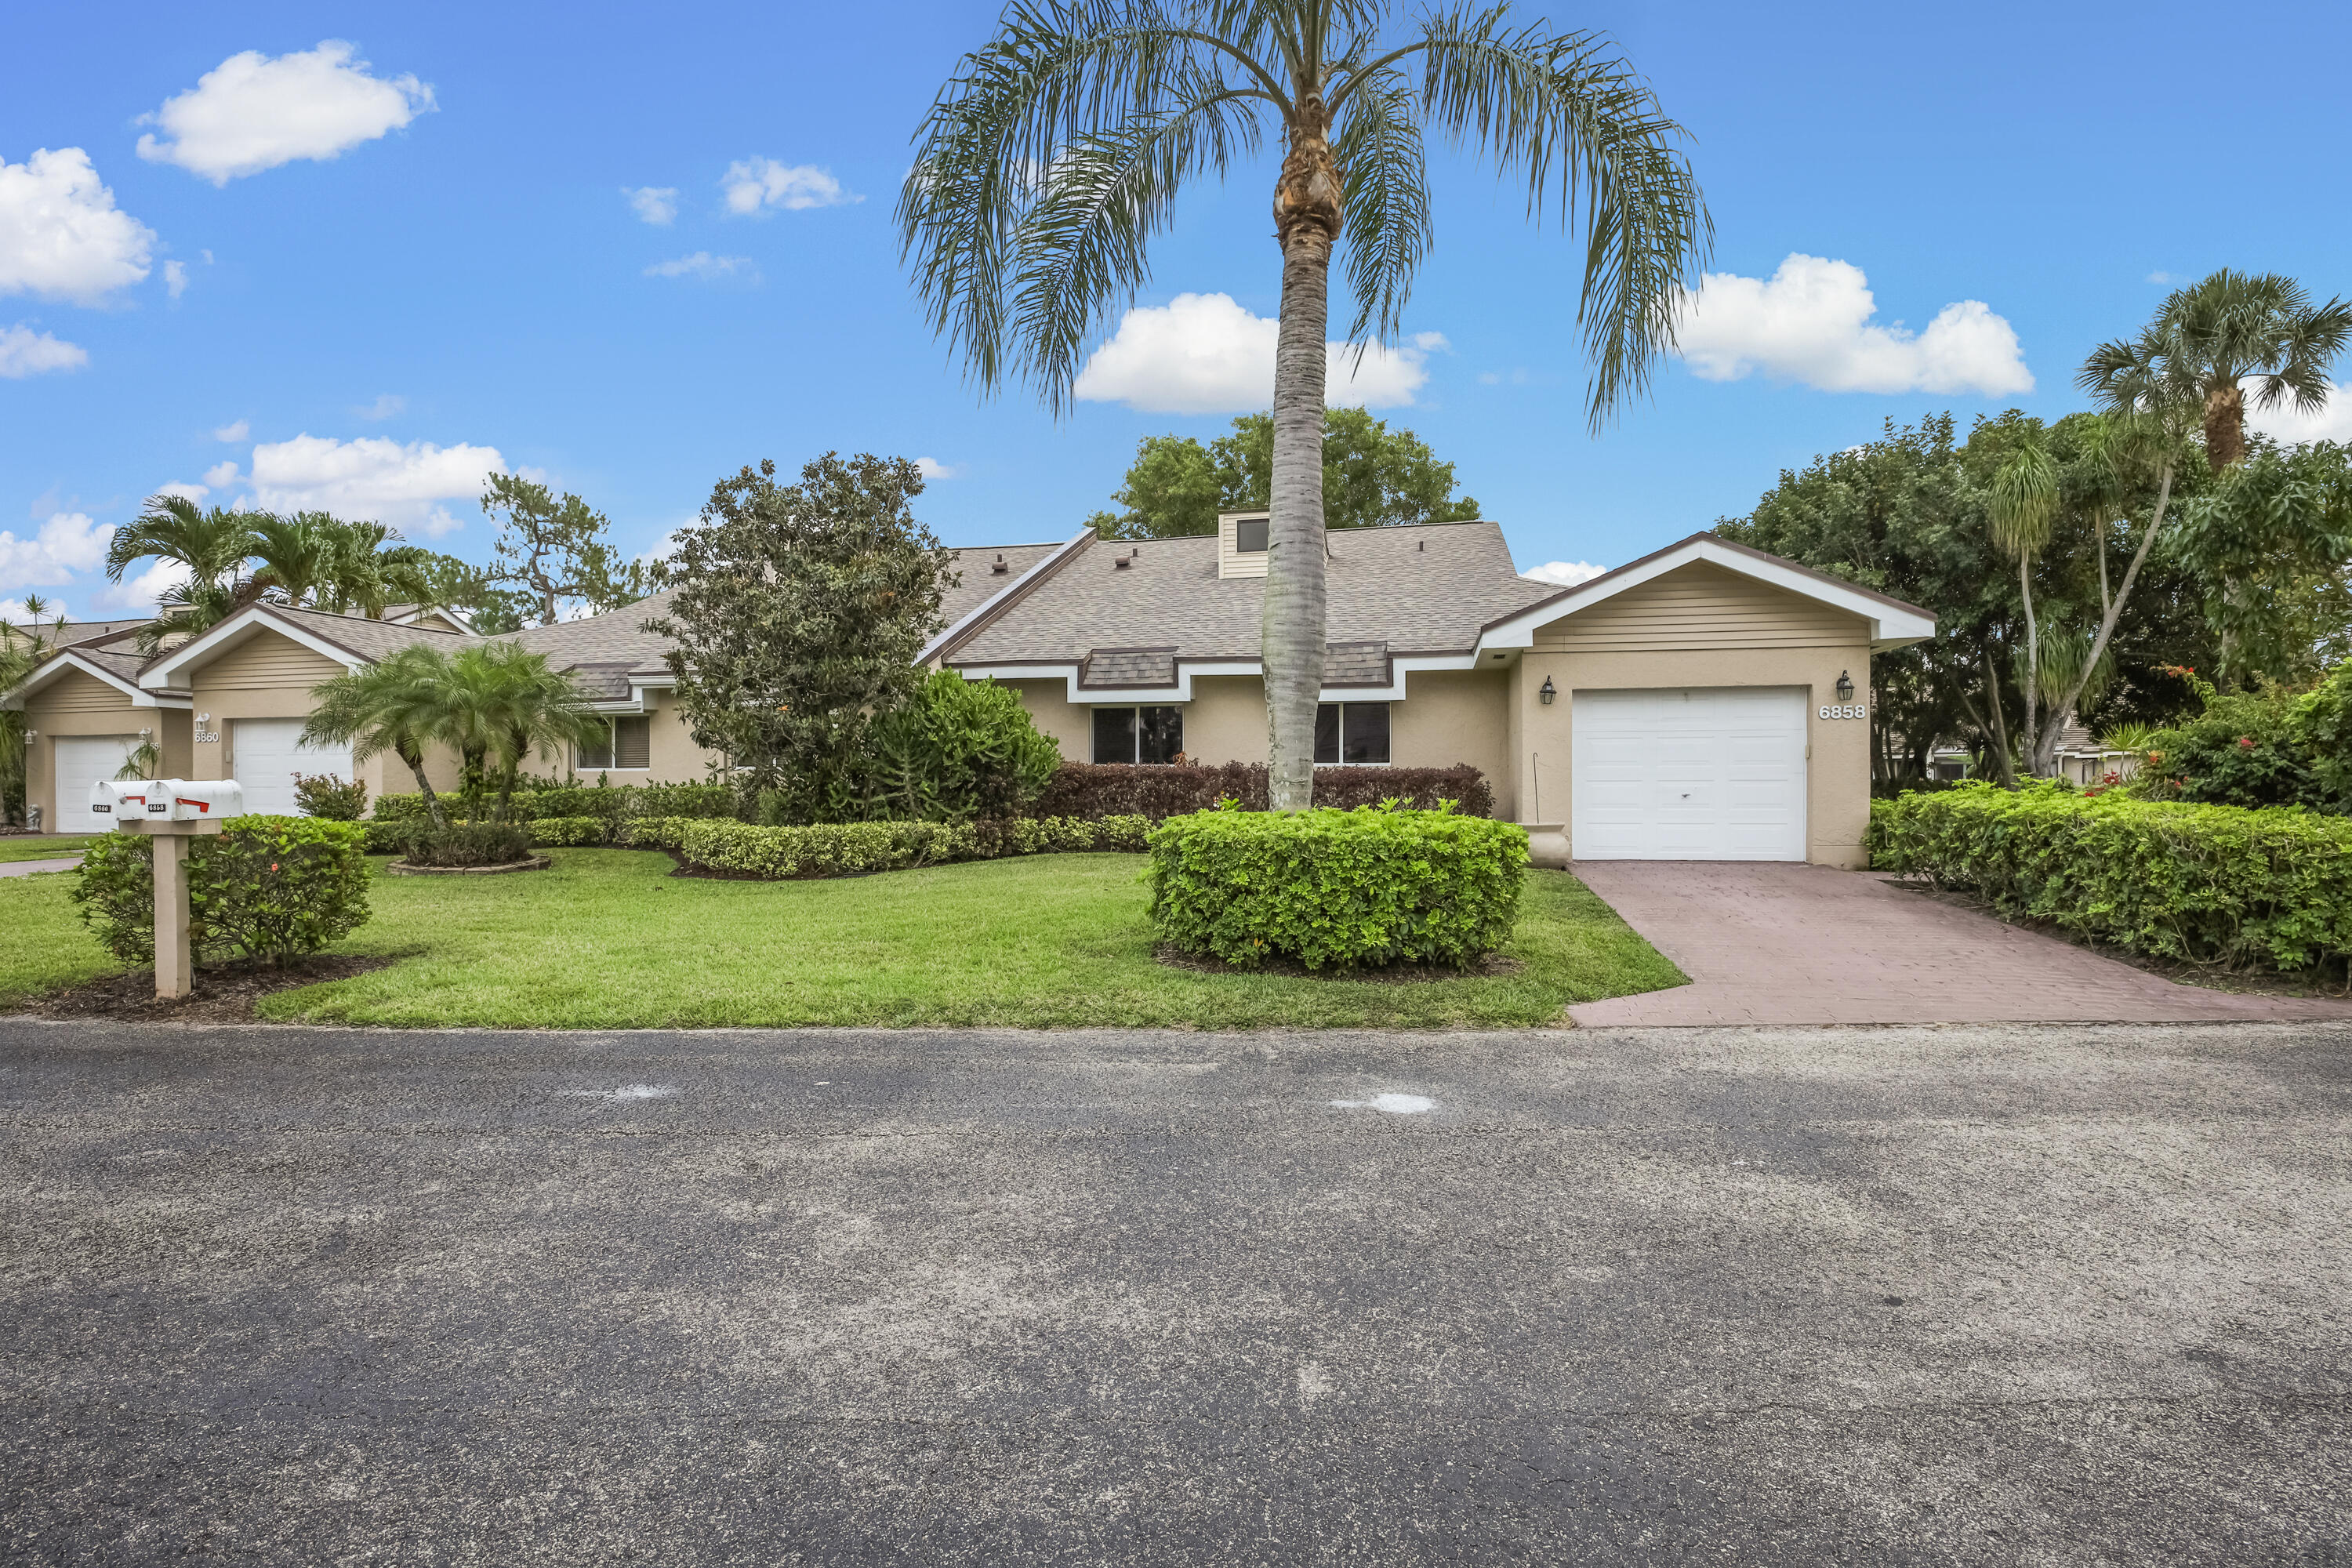 6858 Fountains Circle, Lake Worth, Palm Beach County, Florida - 3 Bedrooms  
2.5 Bathrooms - 